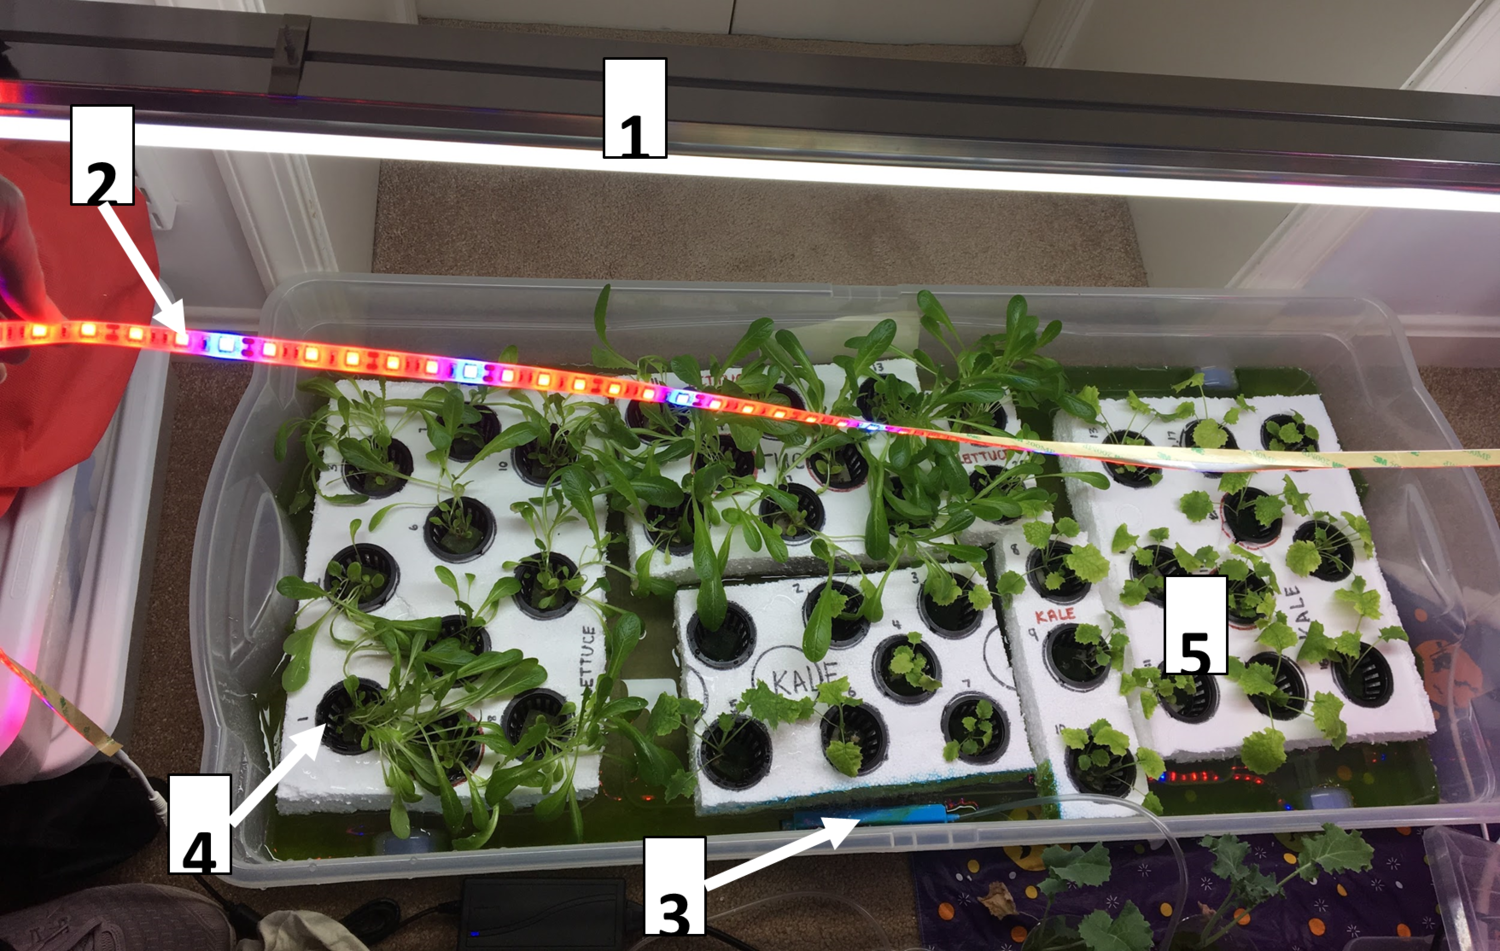 Figure 1:&nbsp;Displays the horizontal system for plant growth. Plants are positioned flat while they grow upwards, similar to traditional agriculture.&nbsp;1.&nbsp;White Fluorescent light.&nbsp;2.&nbsp;Red and blue LED strip lights.&nbsp;3.&nbsp;Aq…